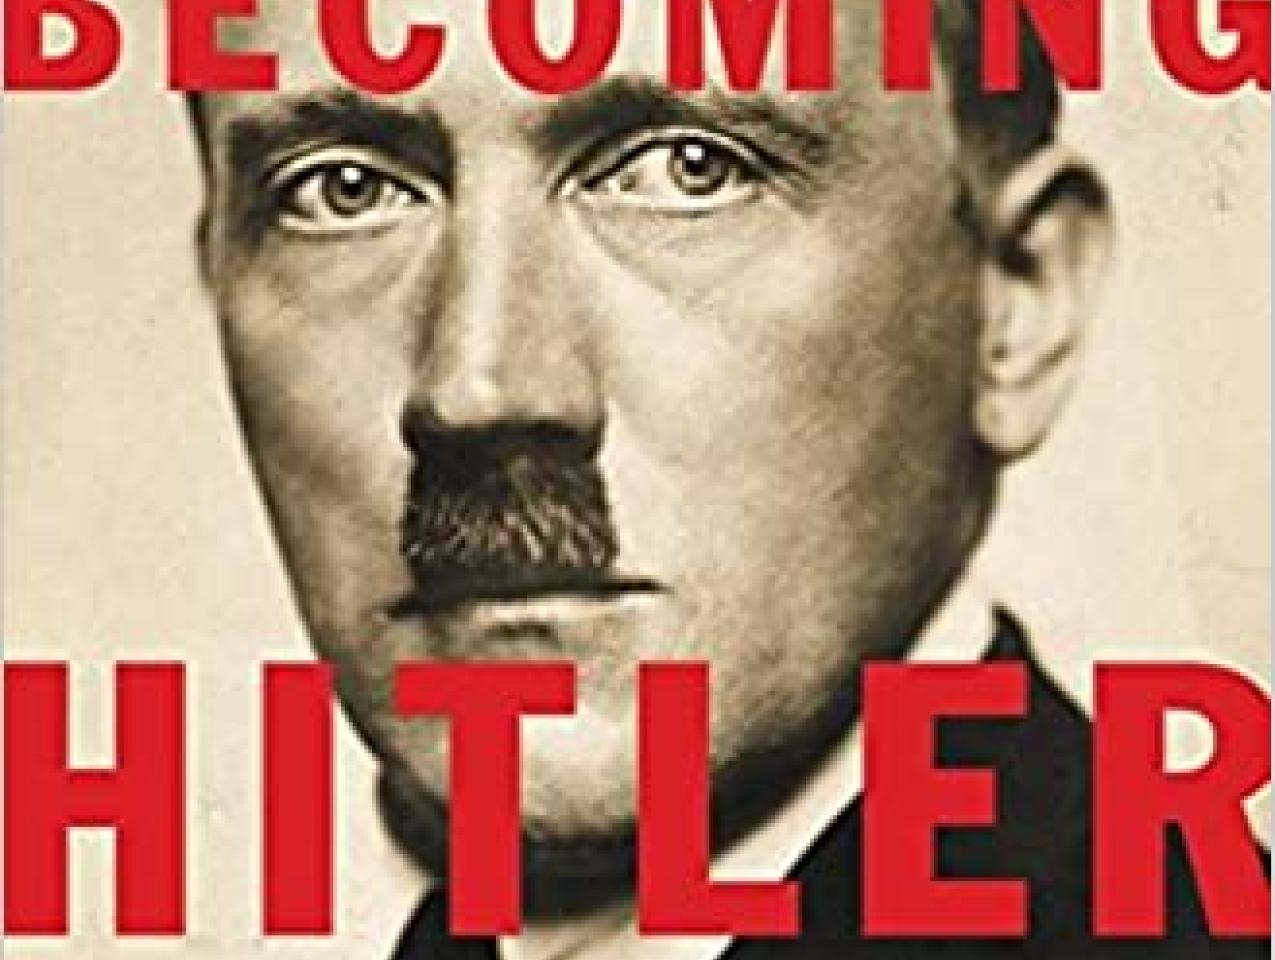 Image for “Becoming Hitler: Lessons from the Making of a Demagogue” with Thomas Weber